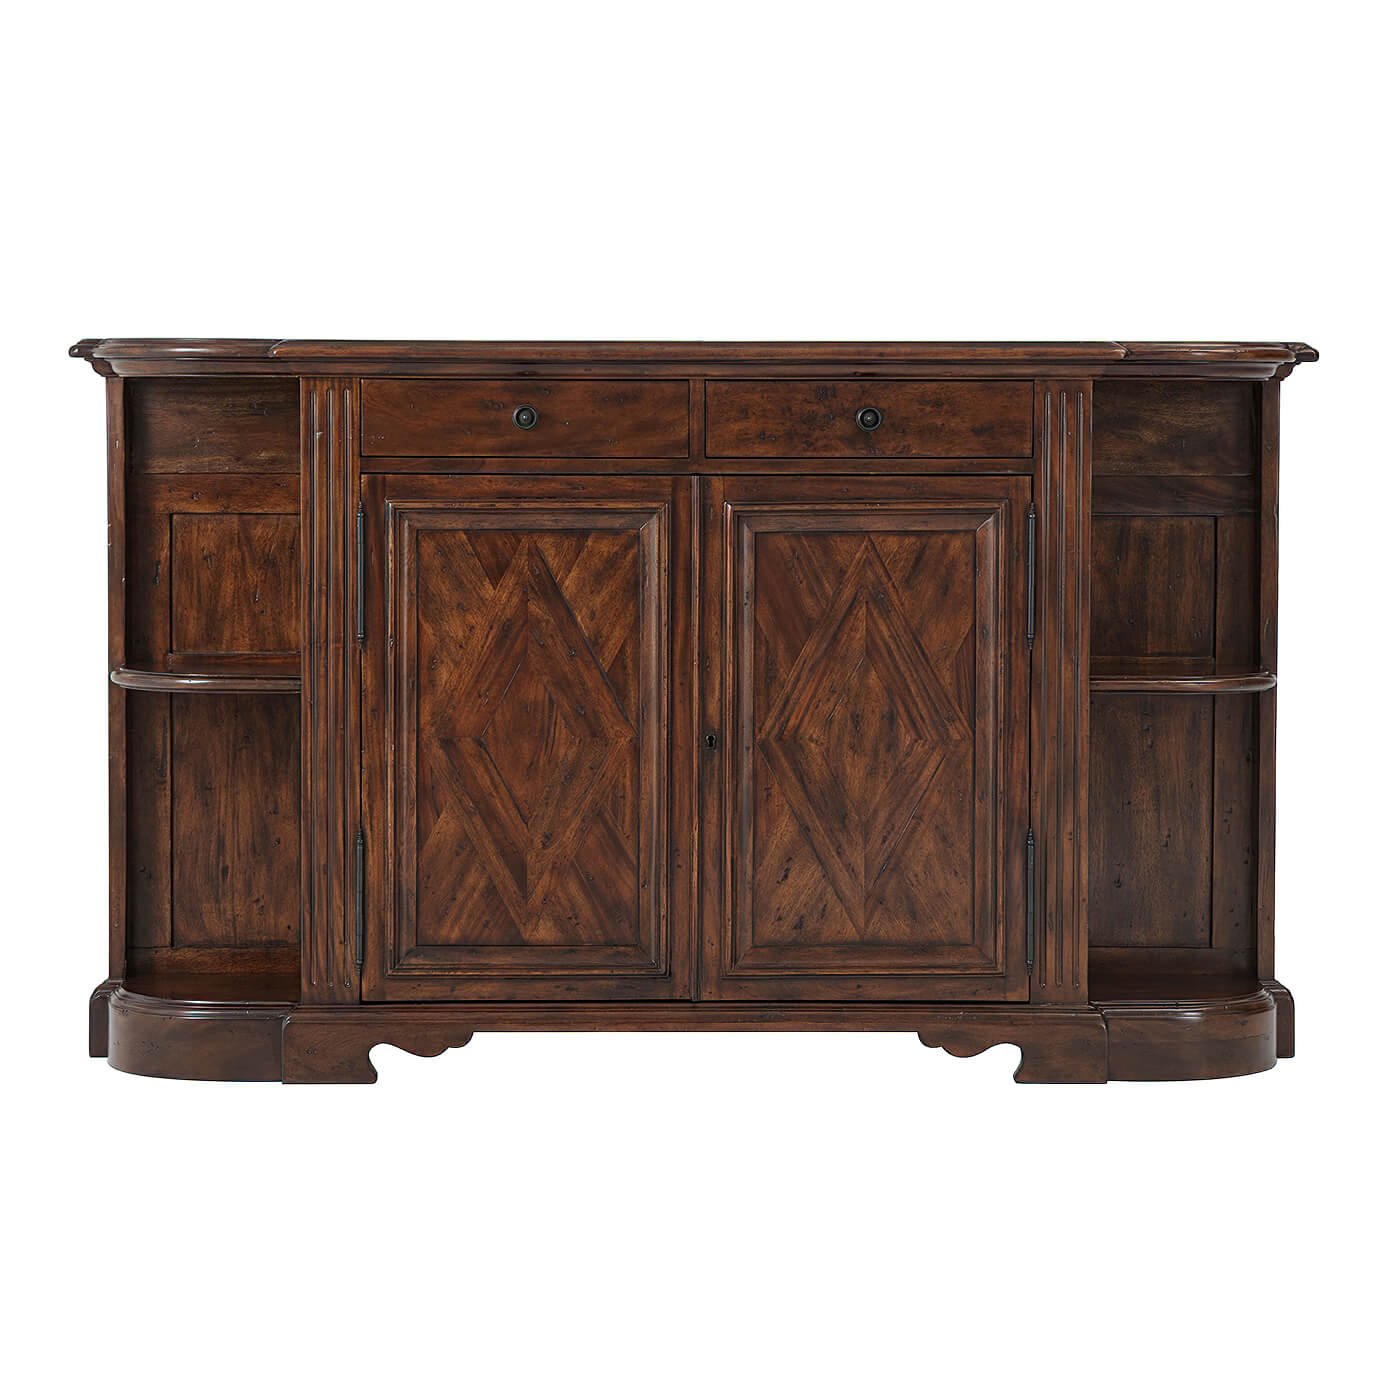 Antiqued Bowfront Side Cabinet - English Georgian America